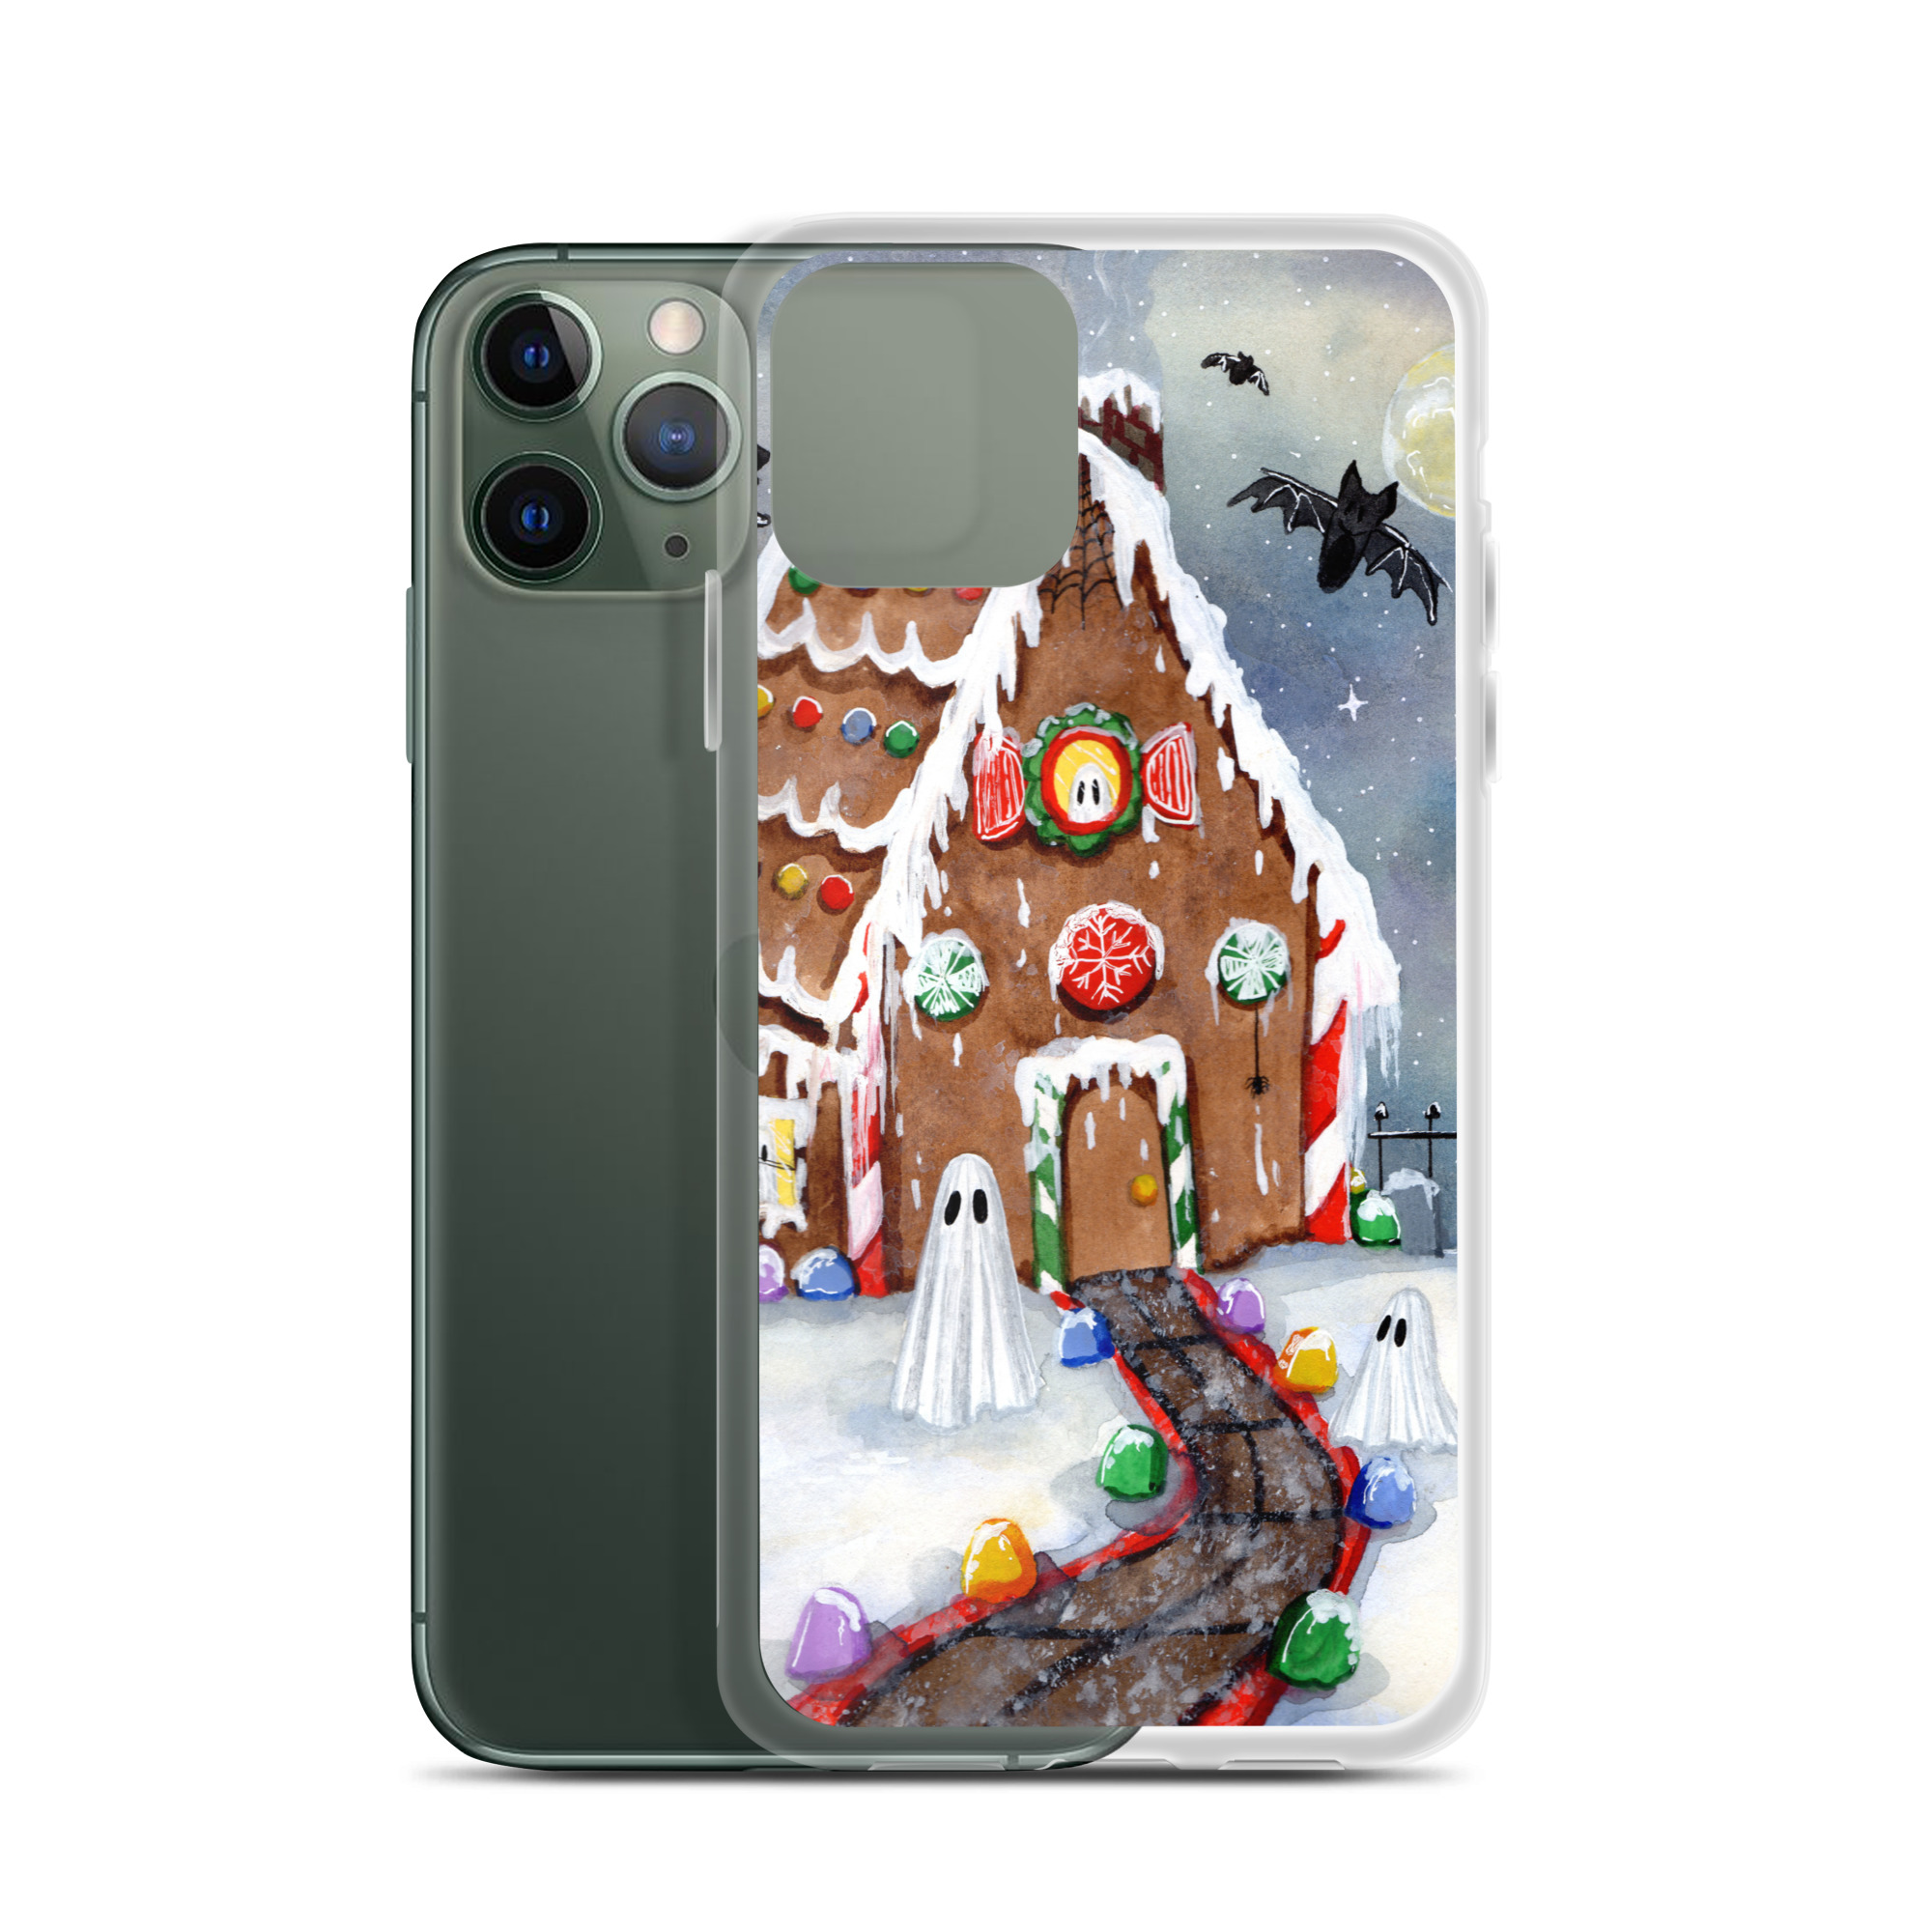 iphone-case-iphone-11-pro-case-with-phone-636d79d61f770.jpg